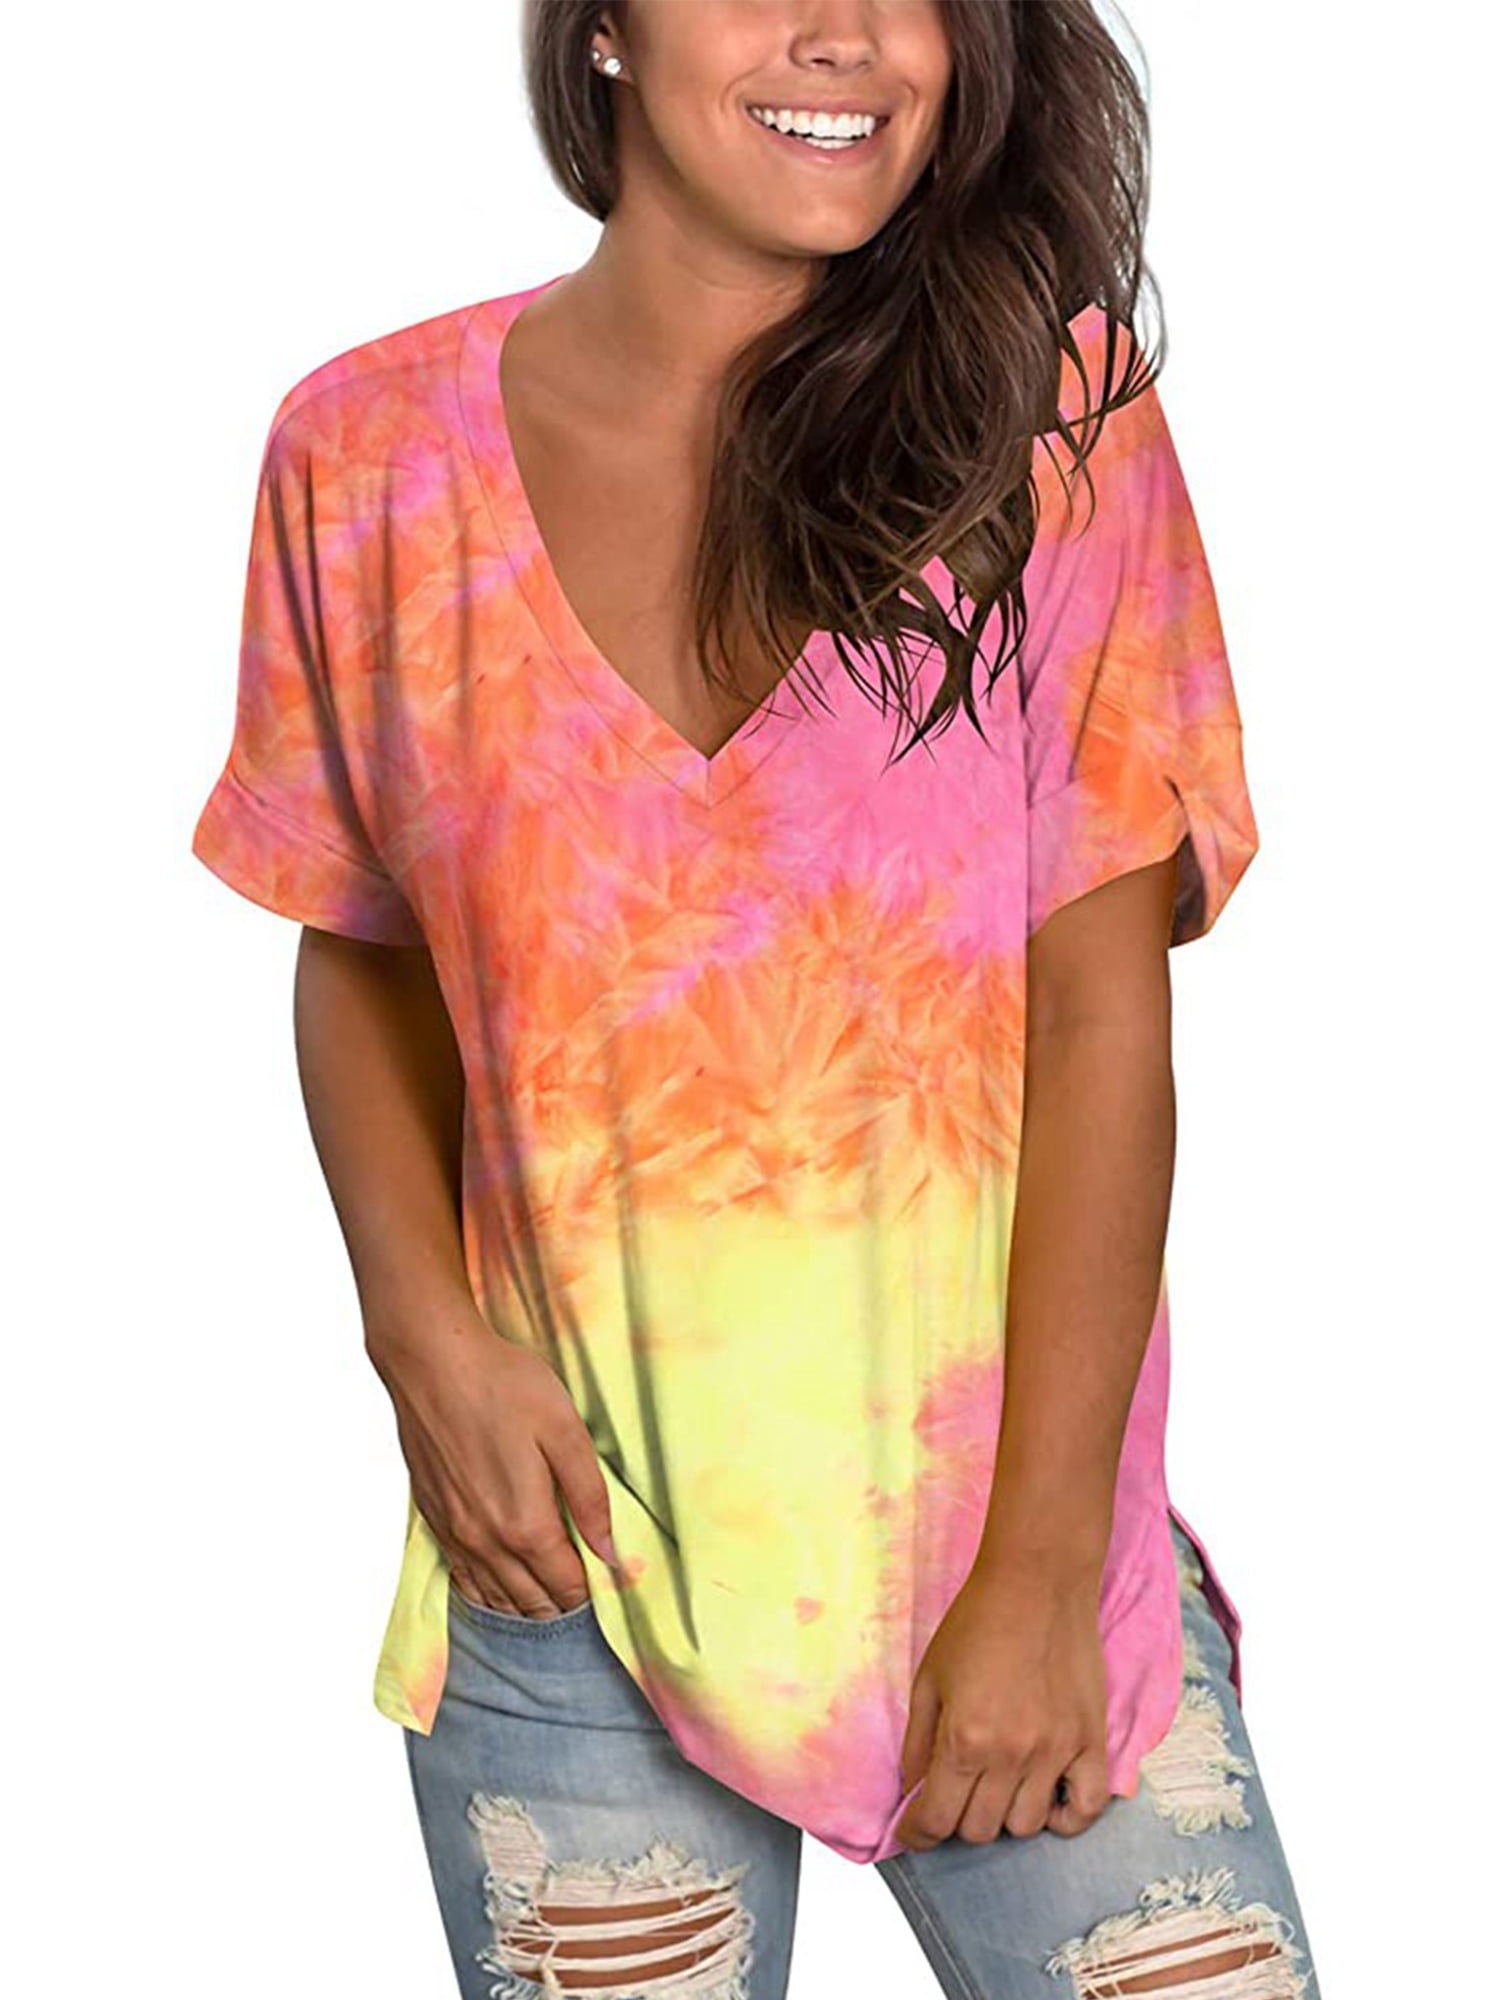 Womens Fashion Gradient T Shirt Casual V-Neck Roll Up Short Sleeve Summer Tops Loose Fit Tie Dye Tunic Blouse Tee